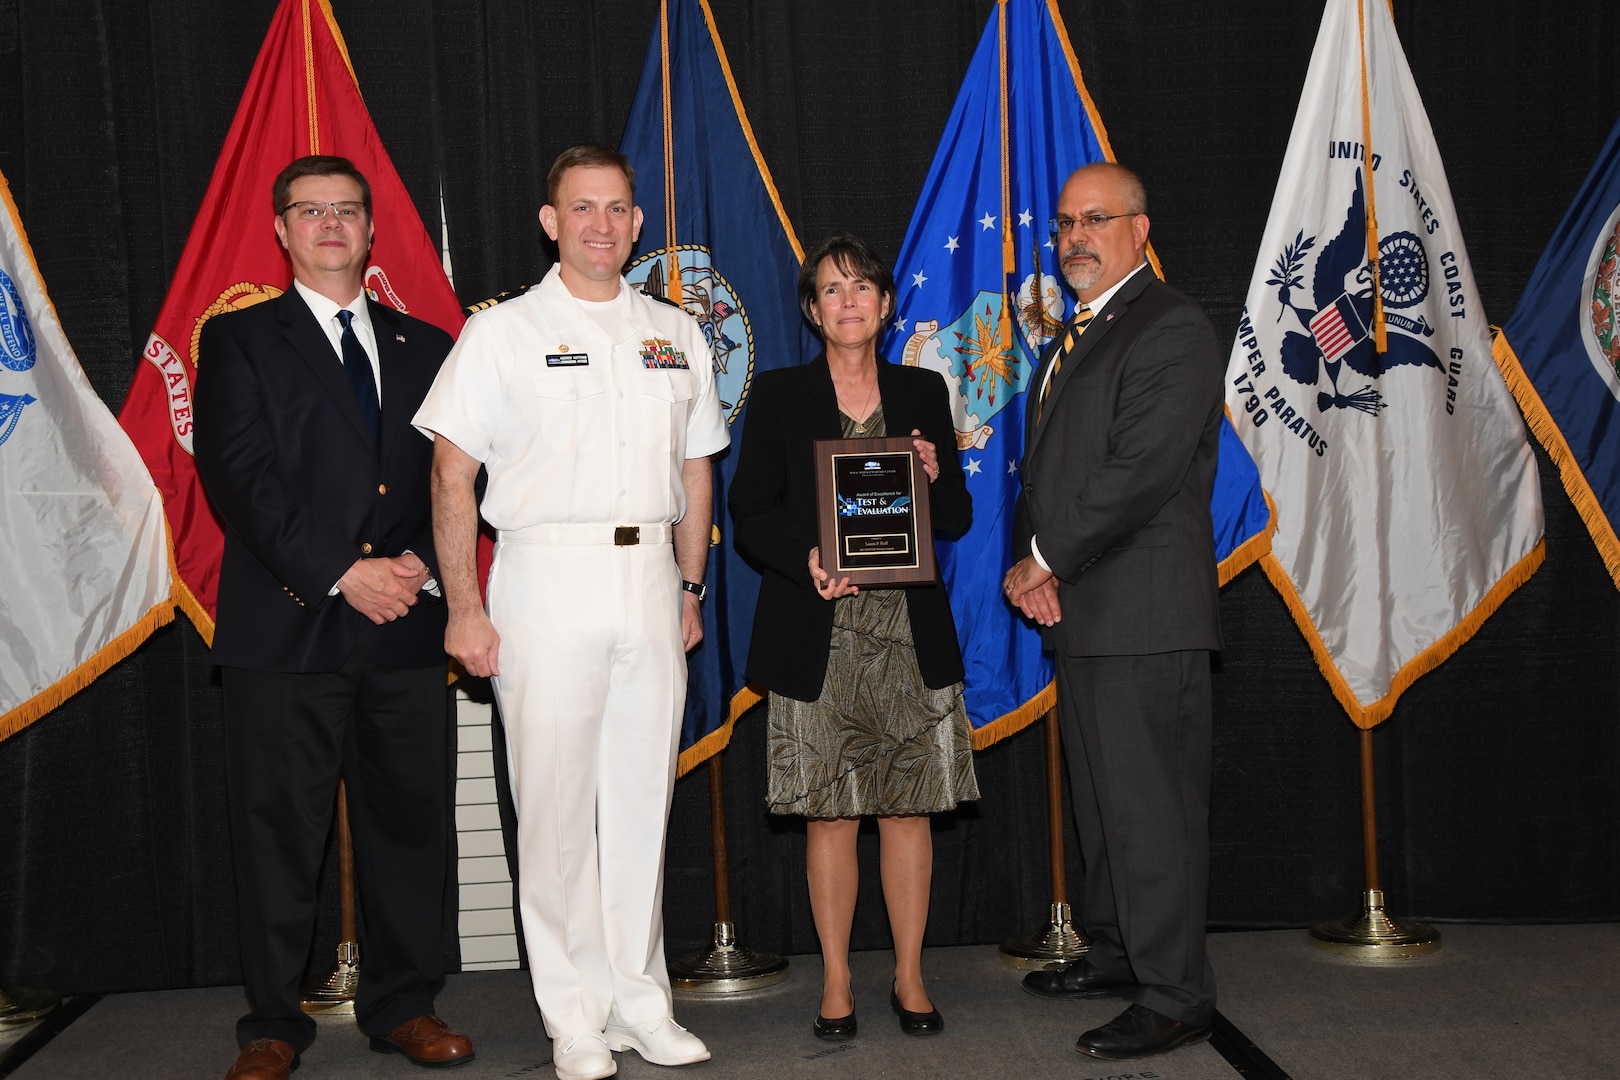 IMAGE: Laura Ruff is presented the NSWCDD Award of Excellence for Test & Evaluation at Naval Surface Warfare Center Dahlgren Division's annual awards ceremony, Apr. 26 at the Fredericksburg Expo and Conference Center.

The NSWCDD Award of Excellence for Test & Evaluation was established to recognize individuals who have made a notable and significant impact to NSWCDD through their outstanding performance in Test and Evaluation, the collection, analysis, and assessment of data to characterize and/or measure the performance of a component, system, platform, or mission.